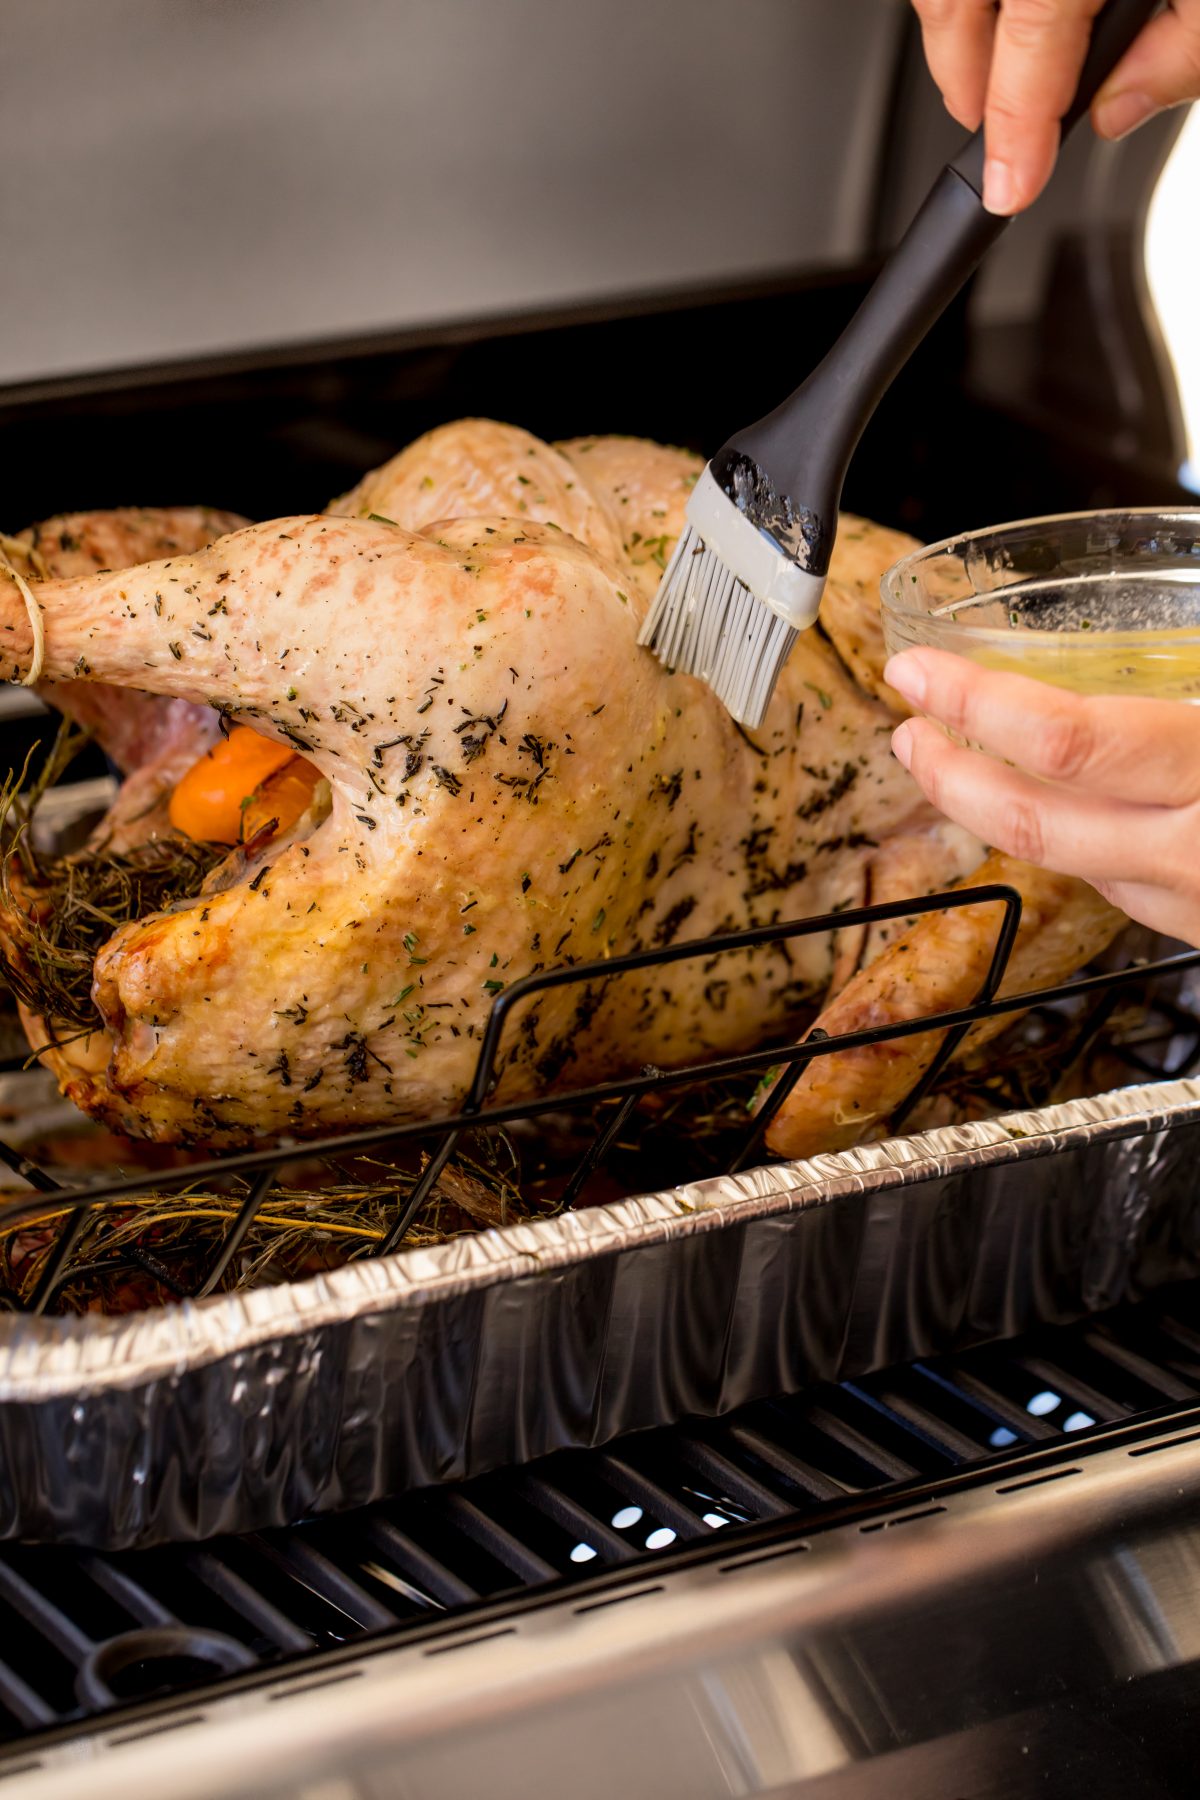 Occasionally baste the turkey with melted butter.